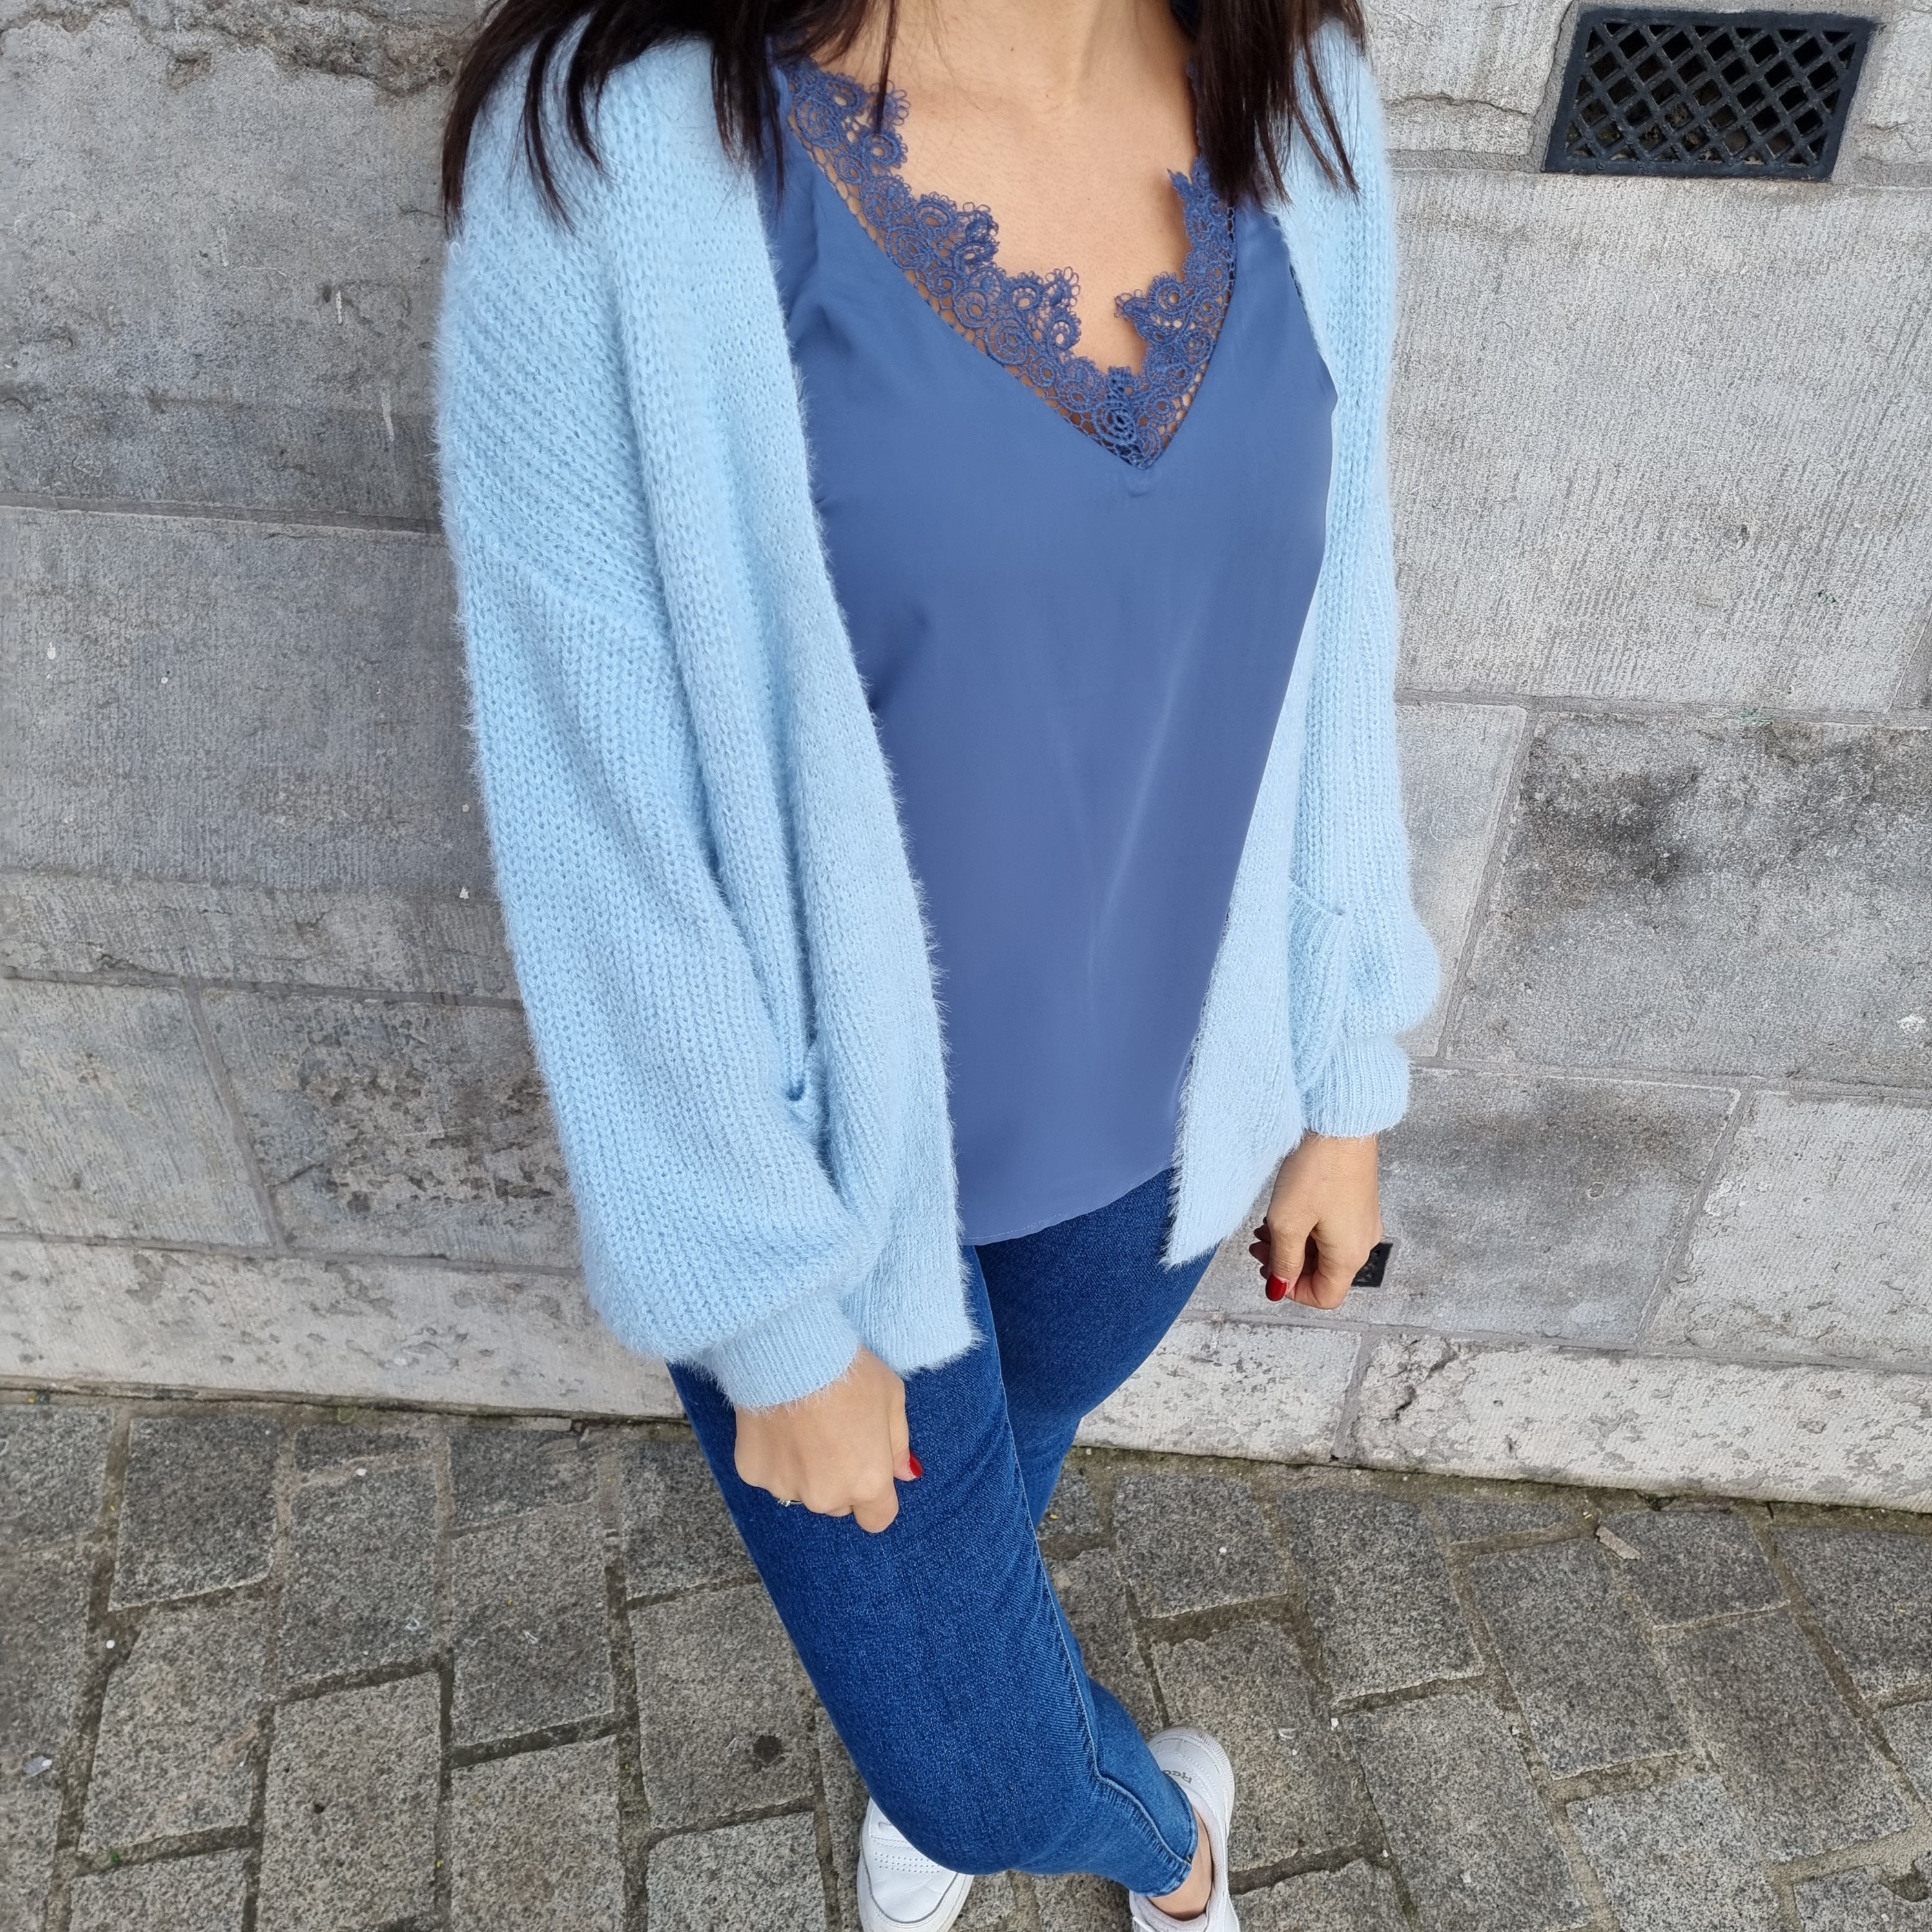 Blue top with lace detail